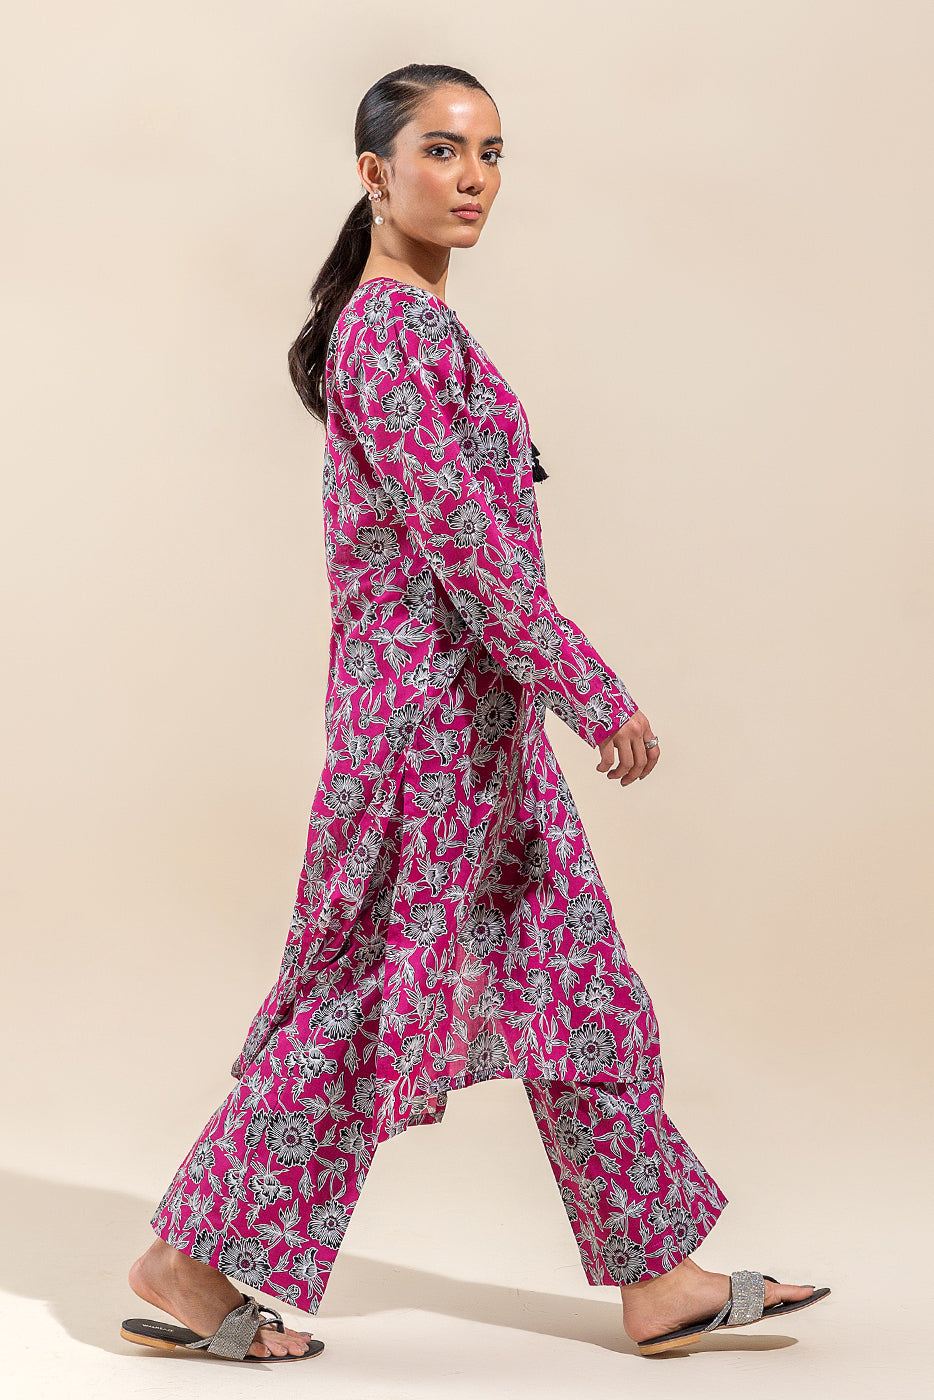 2 PIECE PRINTED LAWN SUIT-FUSCIA GLORY (UNSTITCHED) - BEECHTREE